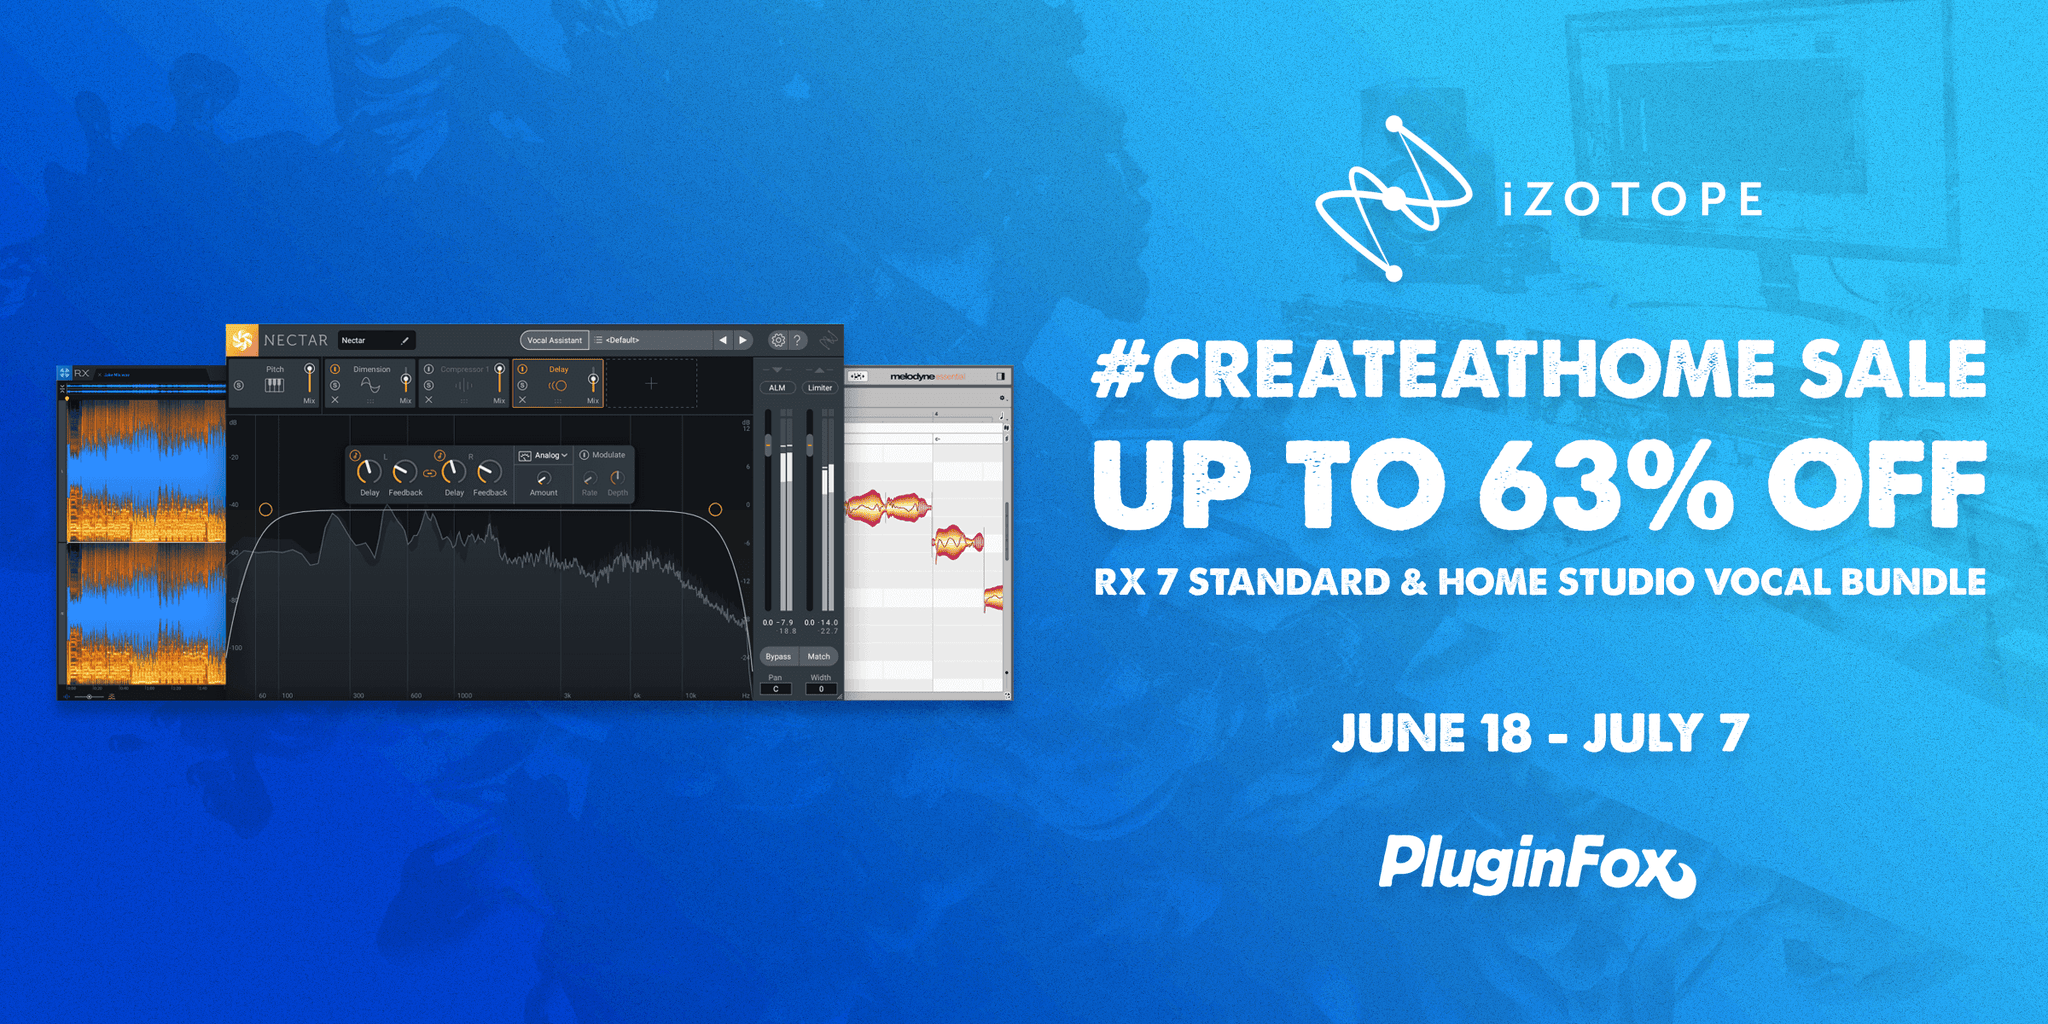 iZotope #CreateFromHome Sale - June 18 - July 7